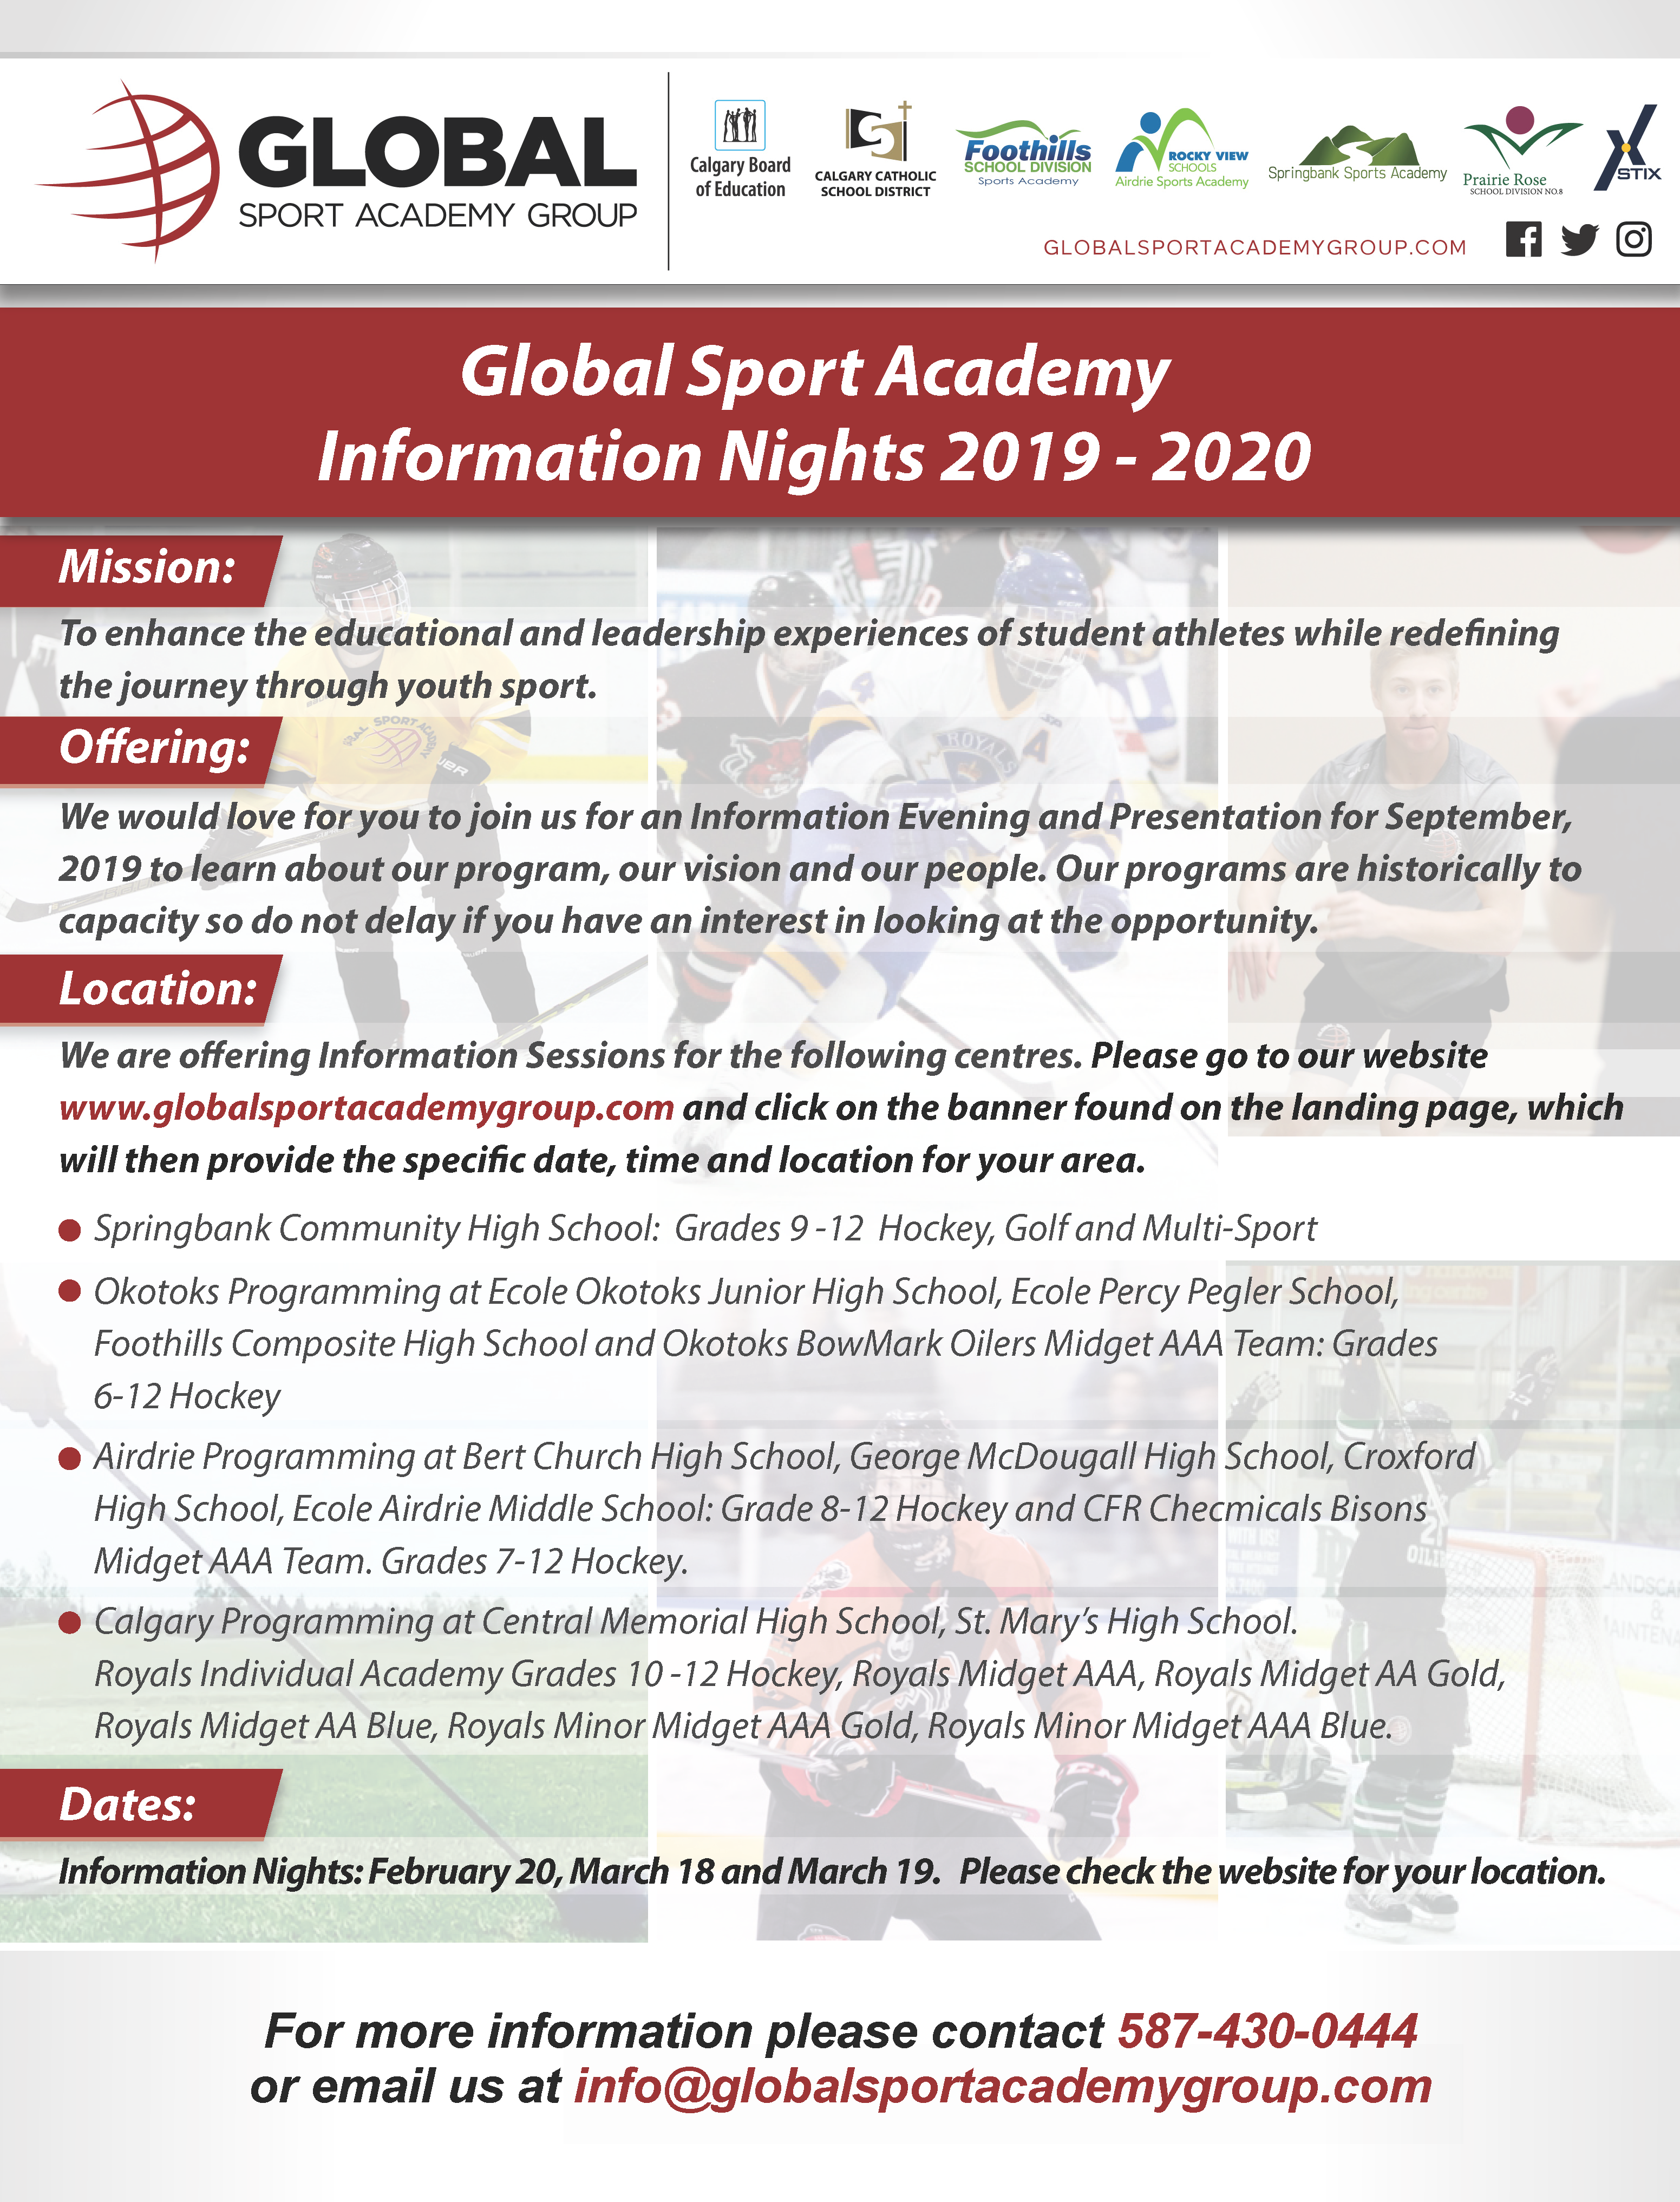 Global Sport Academy Information Nights Poster